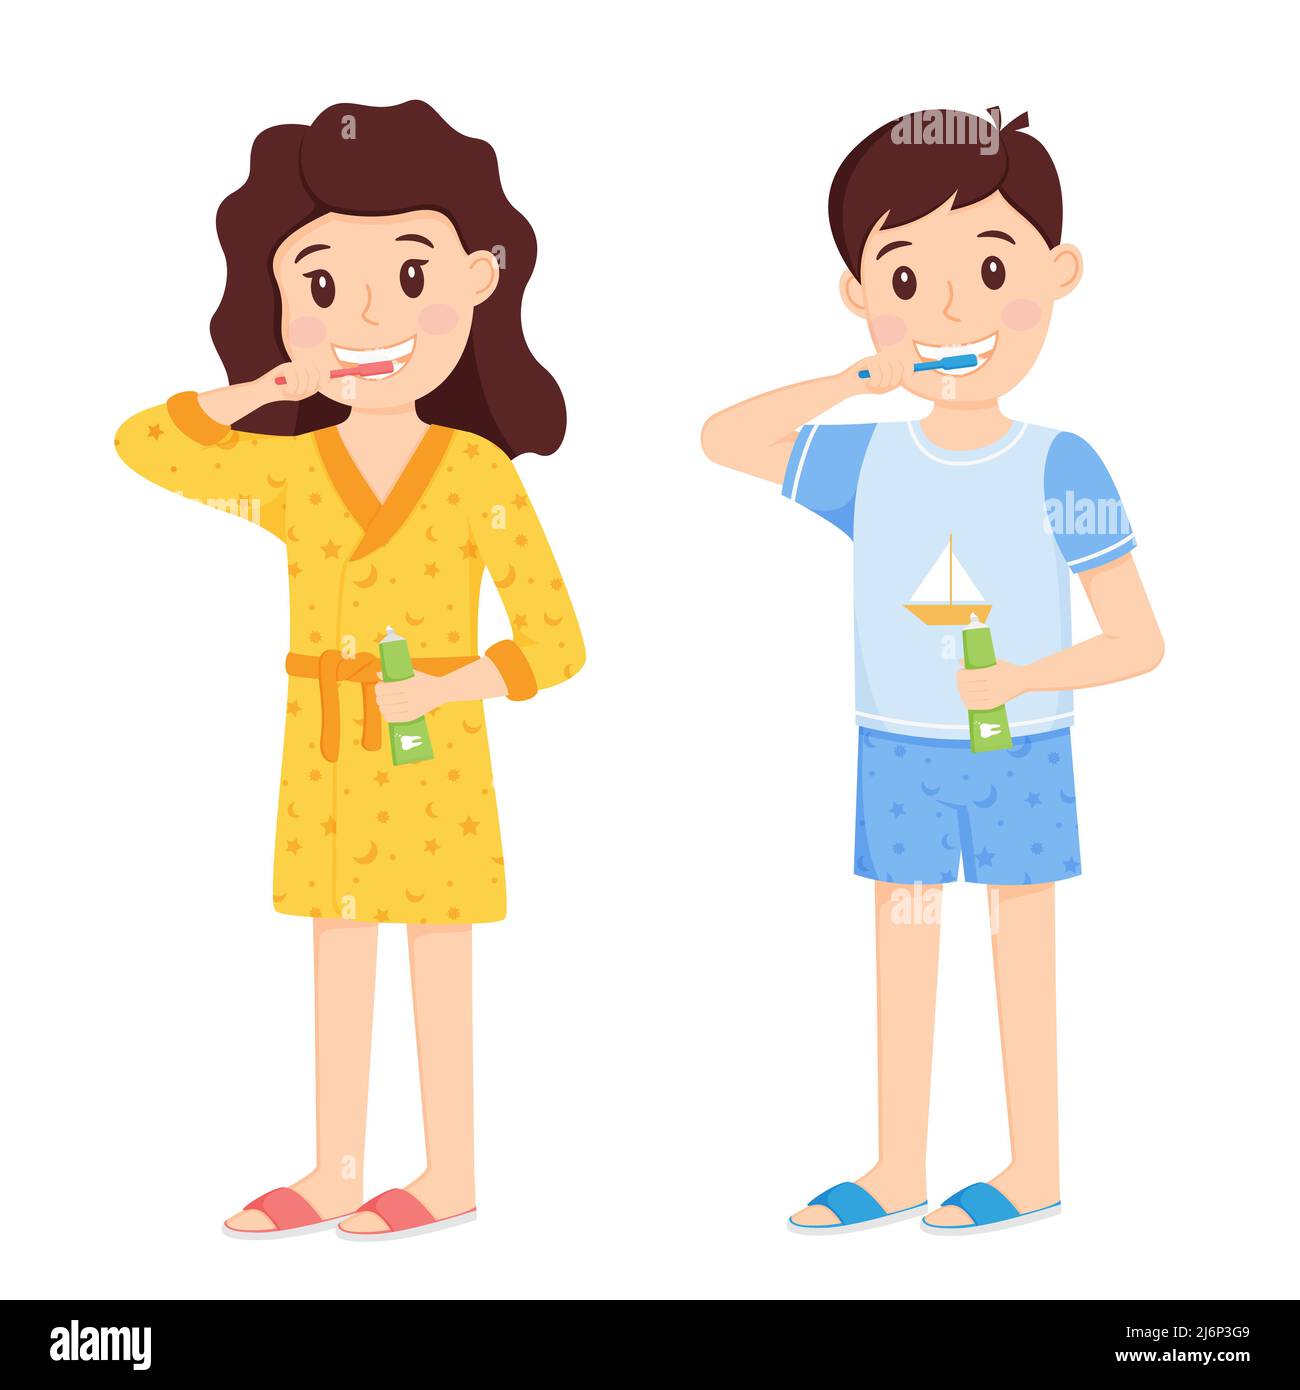 Children a boy and a girl brush their teeth in home clothes. Morning routine, taking care of dental health. Cute cartoon characters. Healthy lifestyle Stock Vector